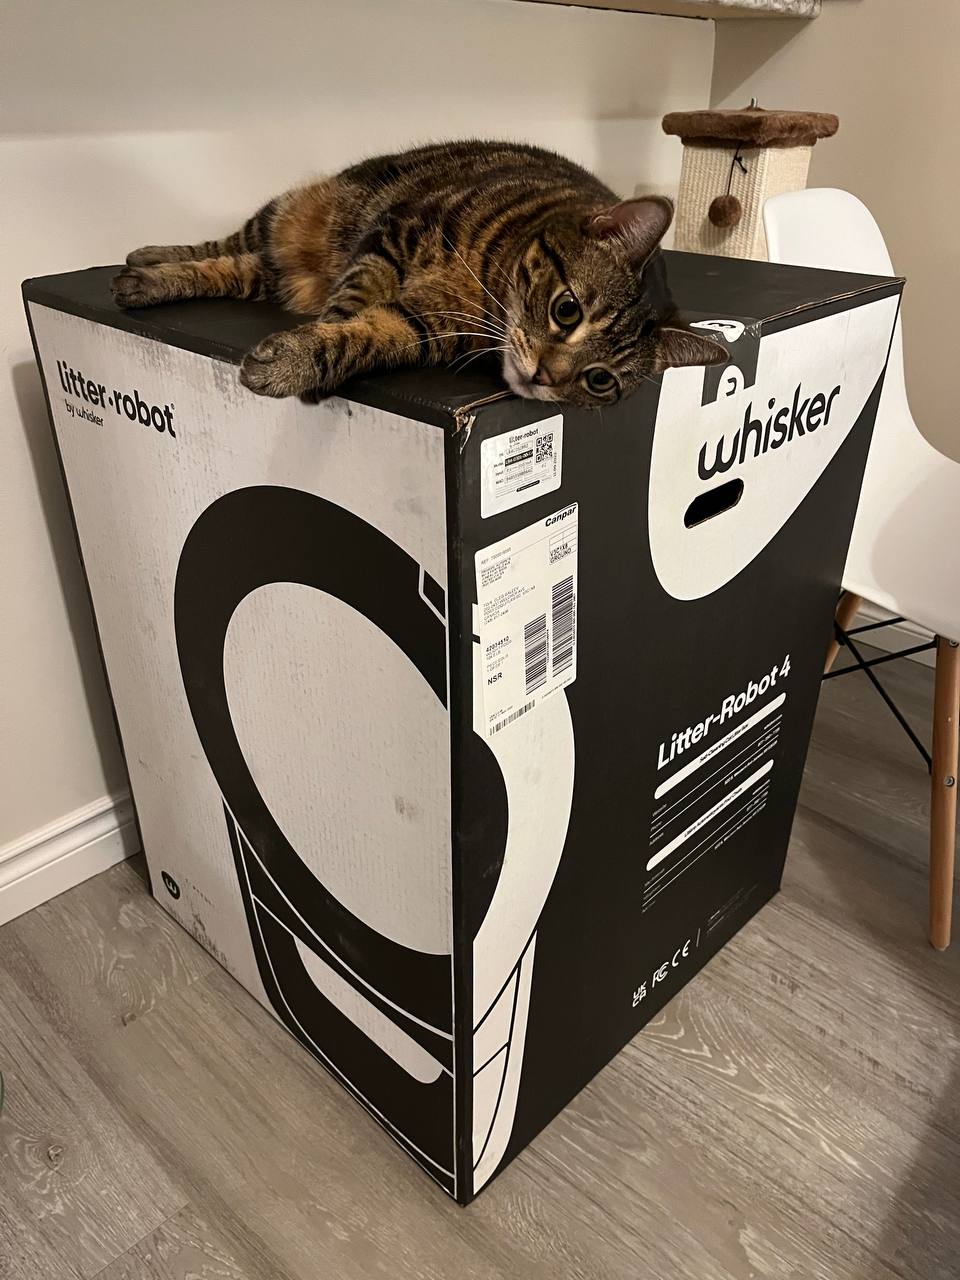 Box with Litter Robot 4 delivered